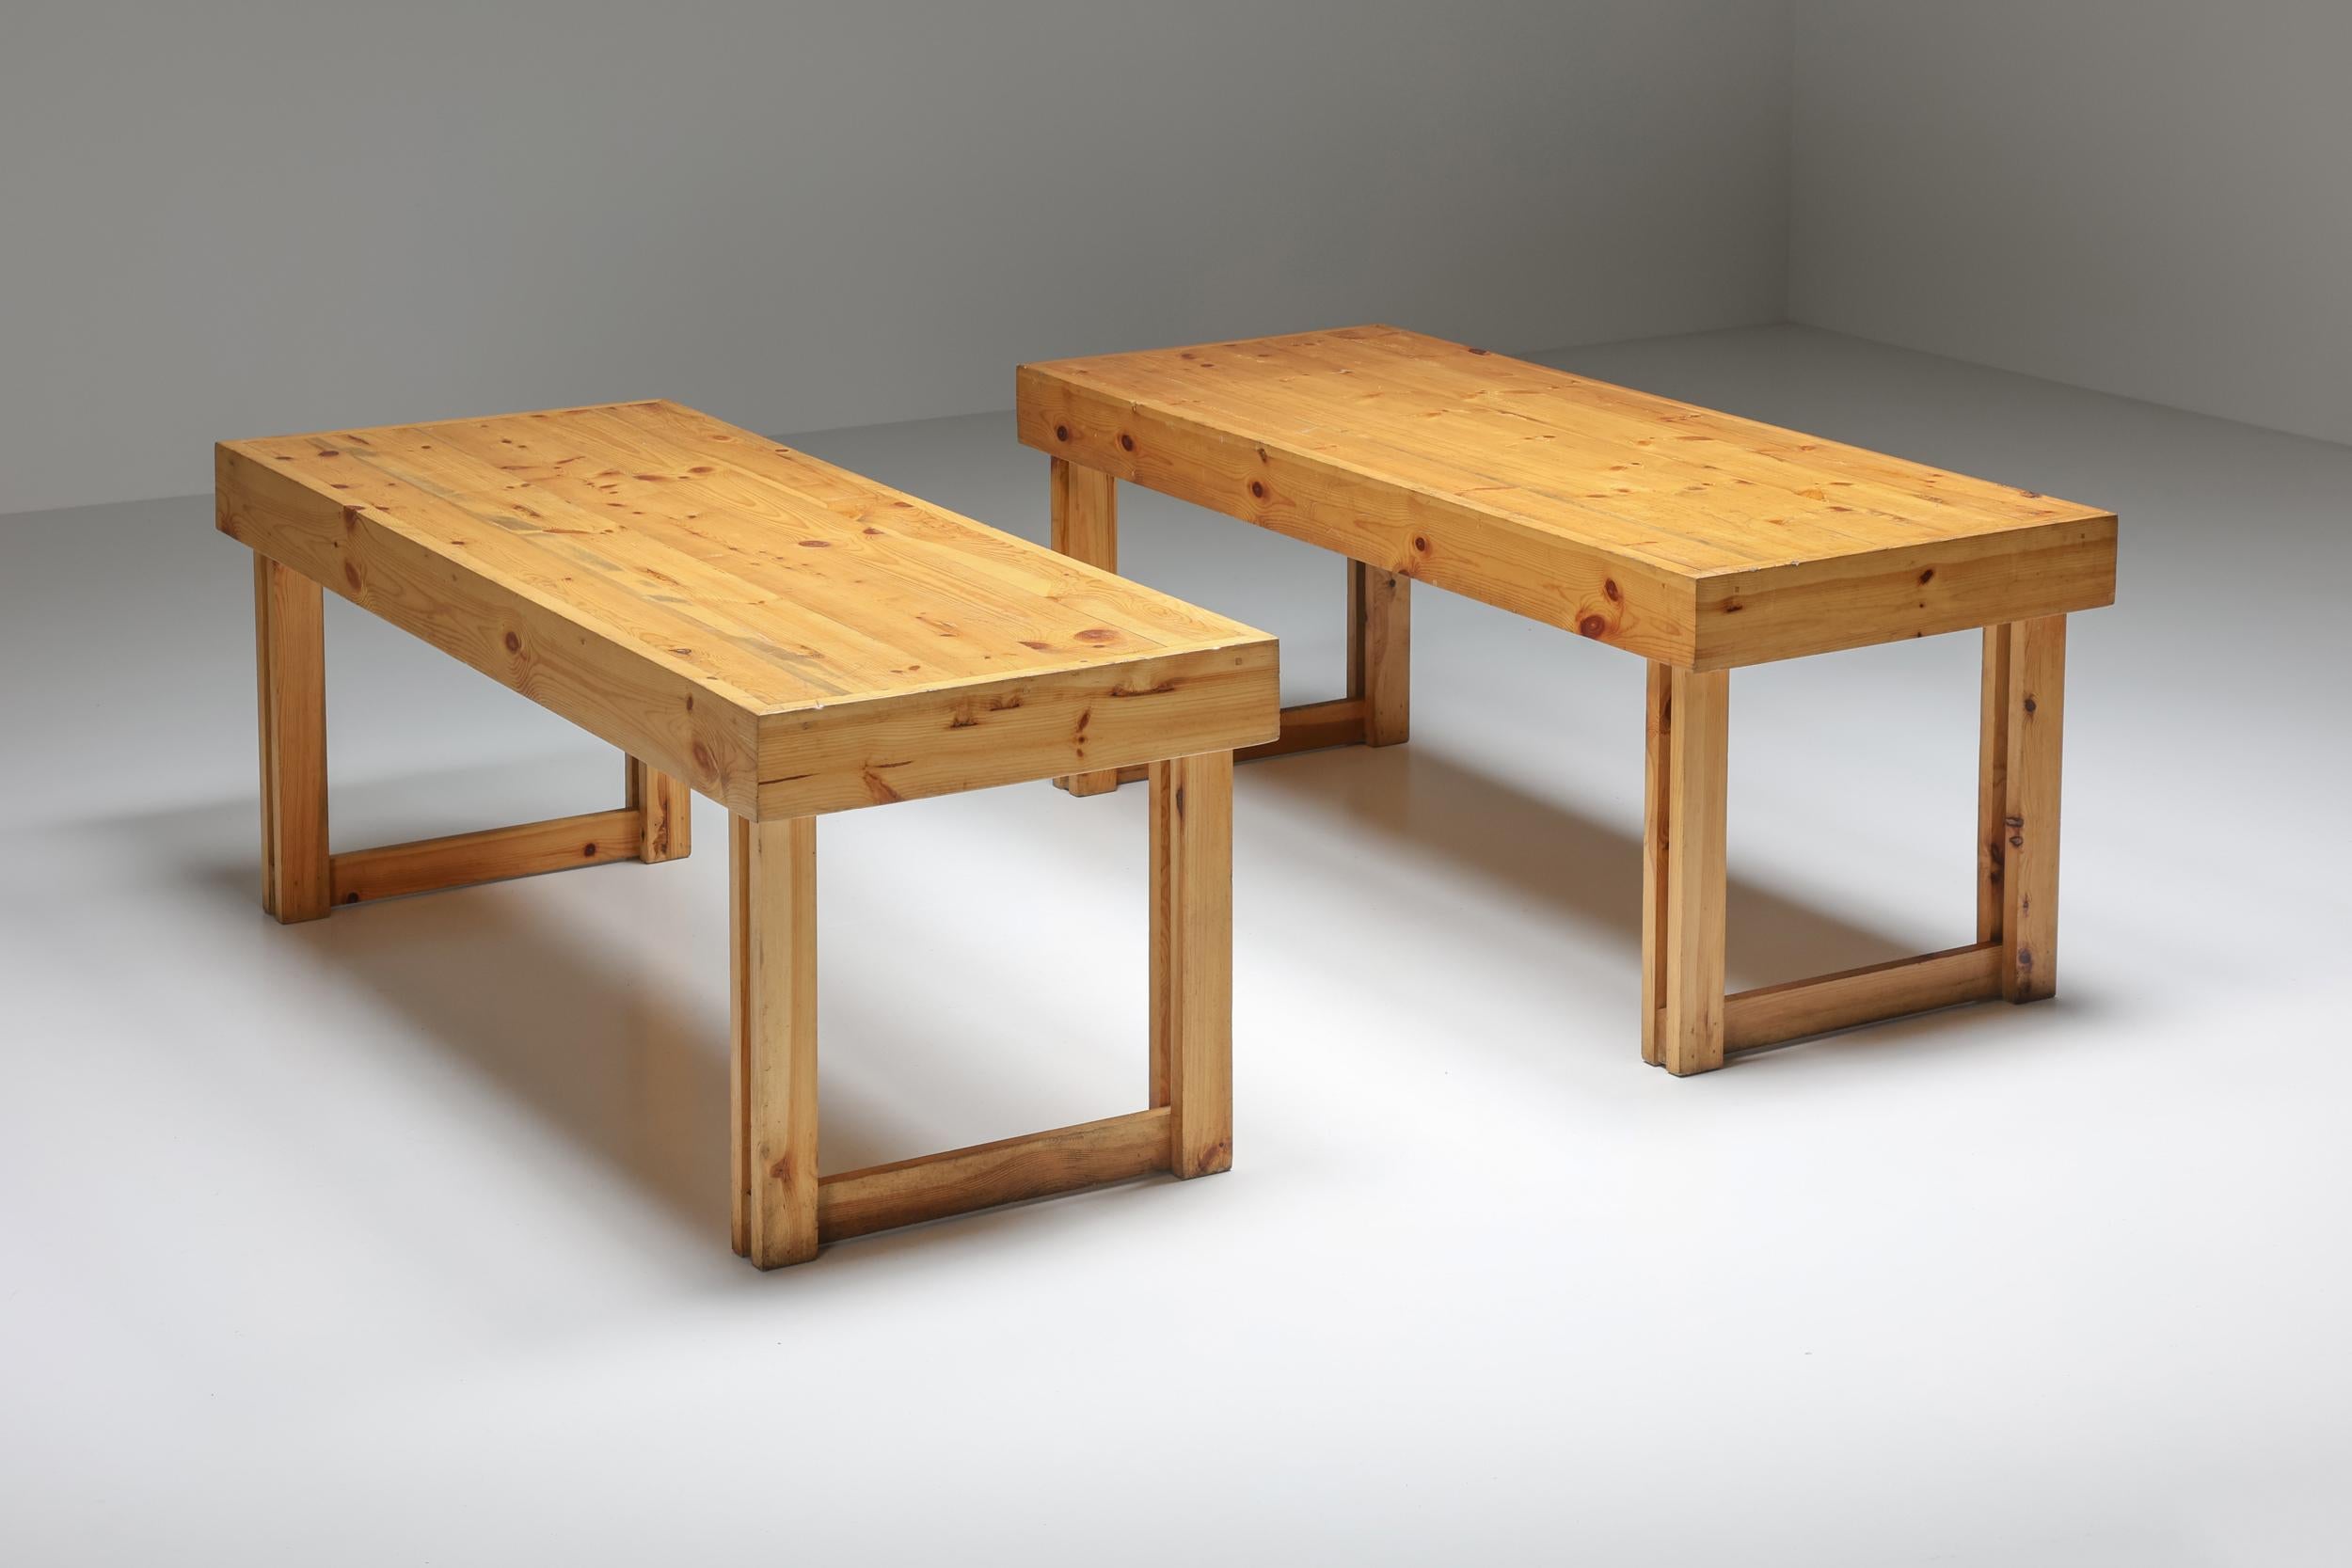 Italian Pine Bench and Table Set from Old Vineyard, Modernist, Italy, 1960's For Sale 1